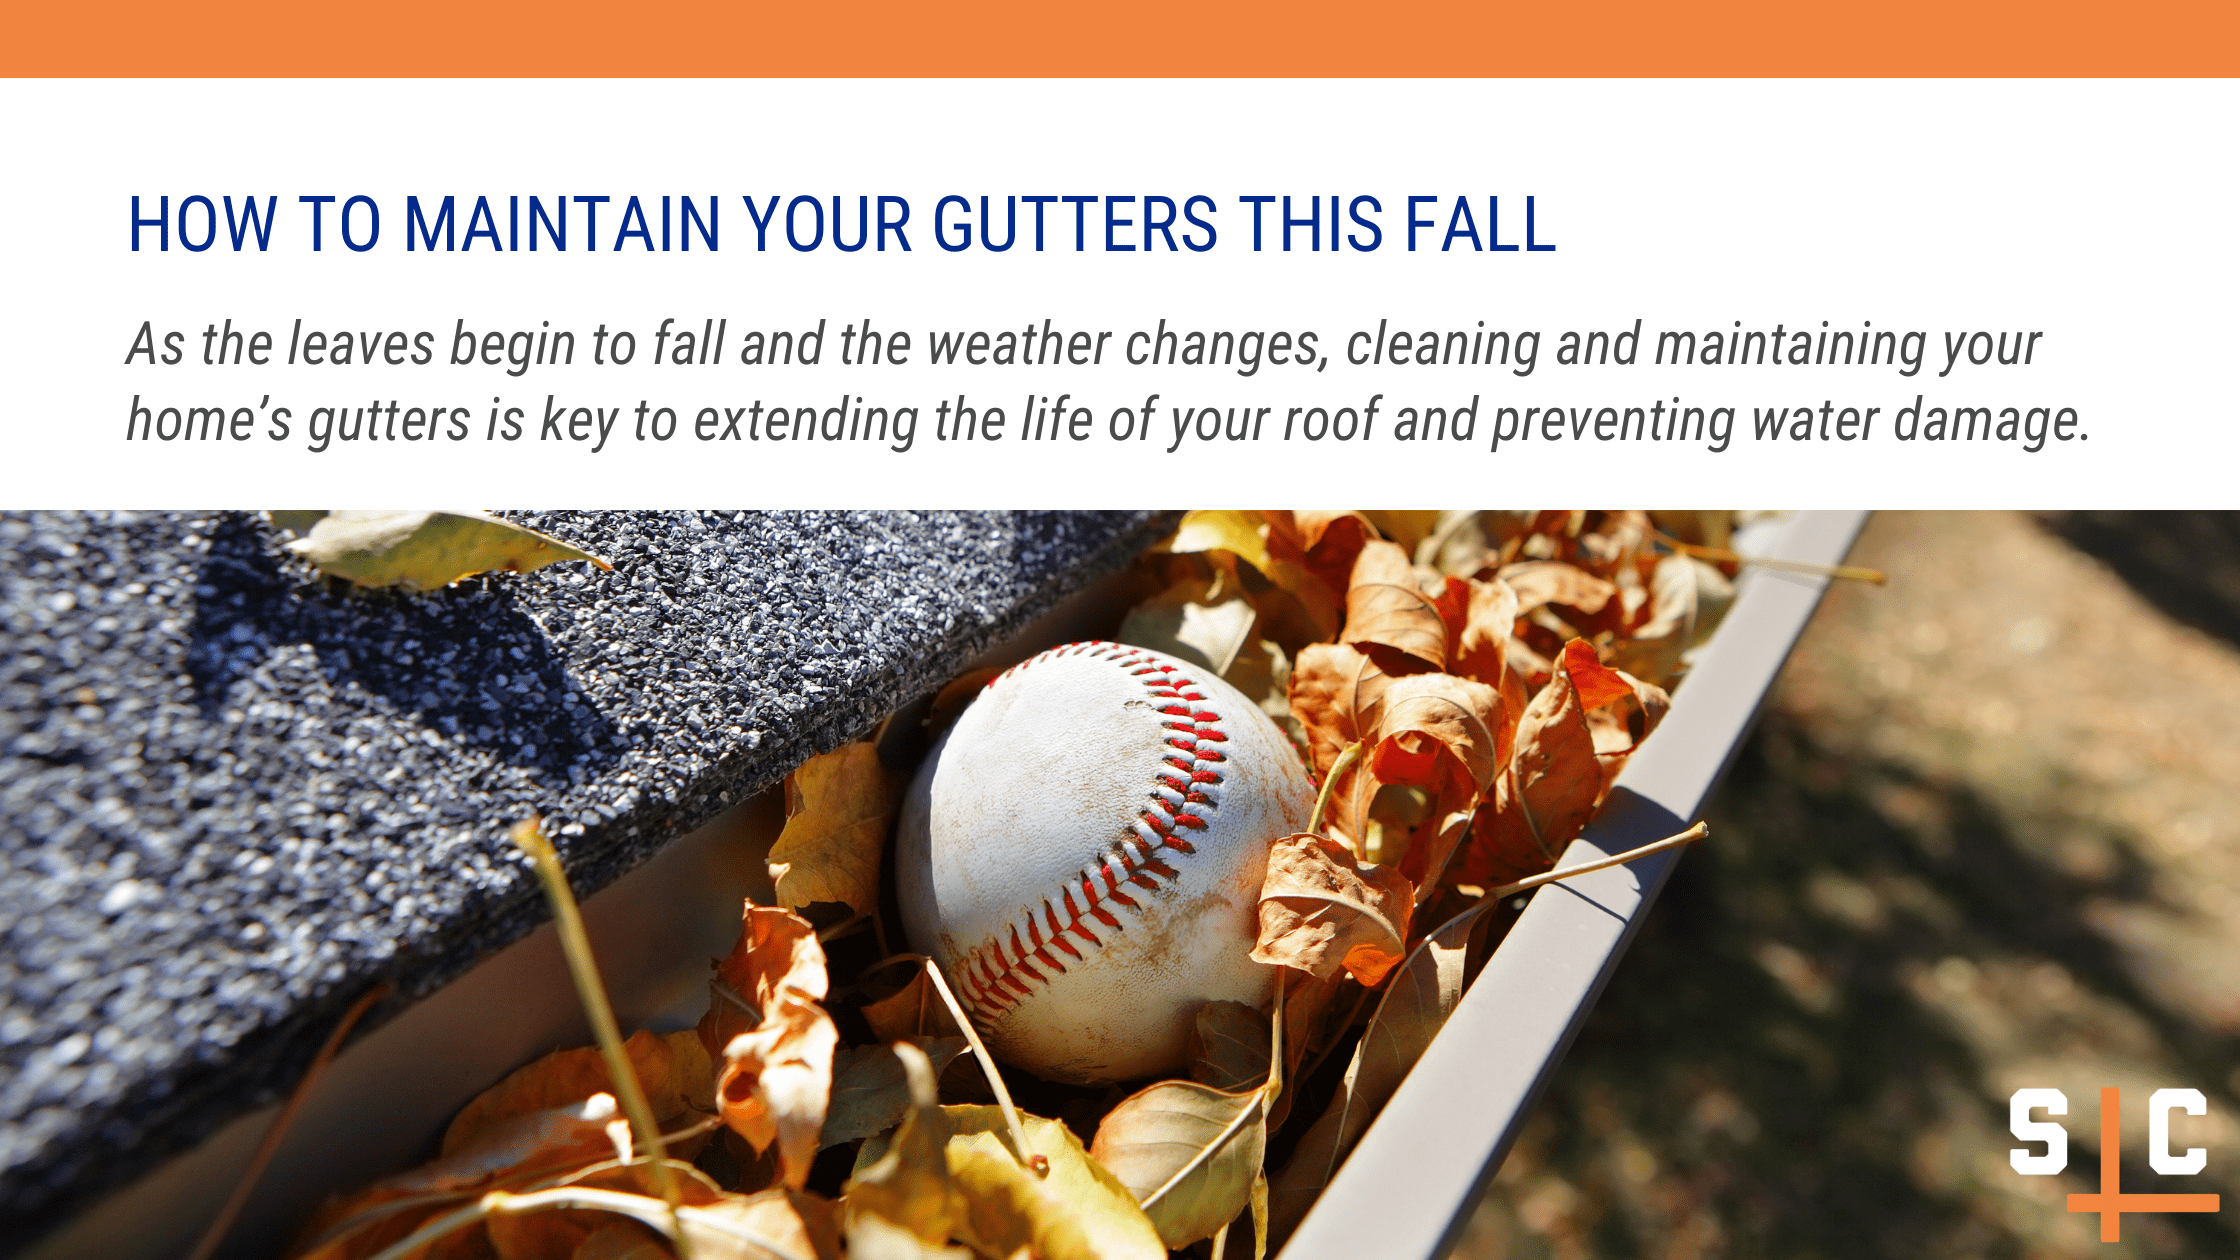 As the leaves begin to fall and the weather changes, cleaning and maintaining your home’s gutters is key to extending the life of your roof and preventing water damage.